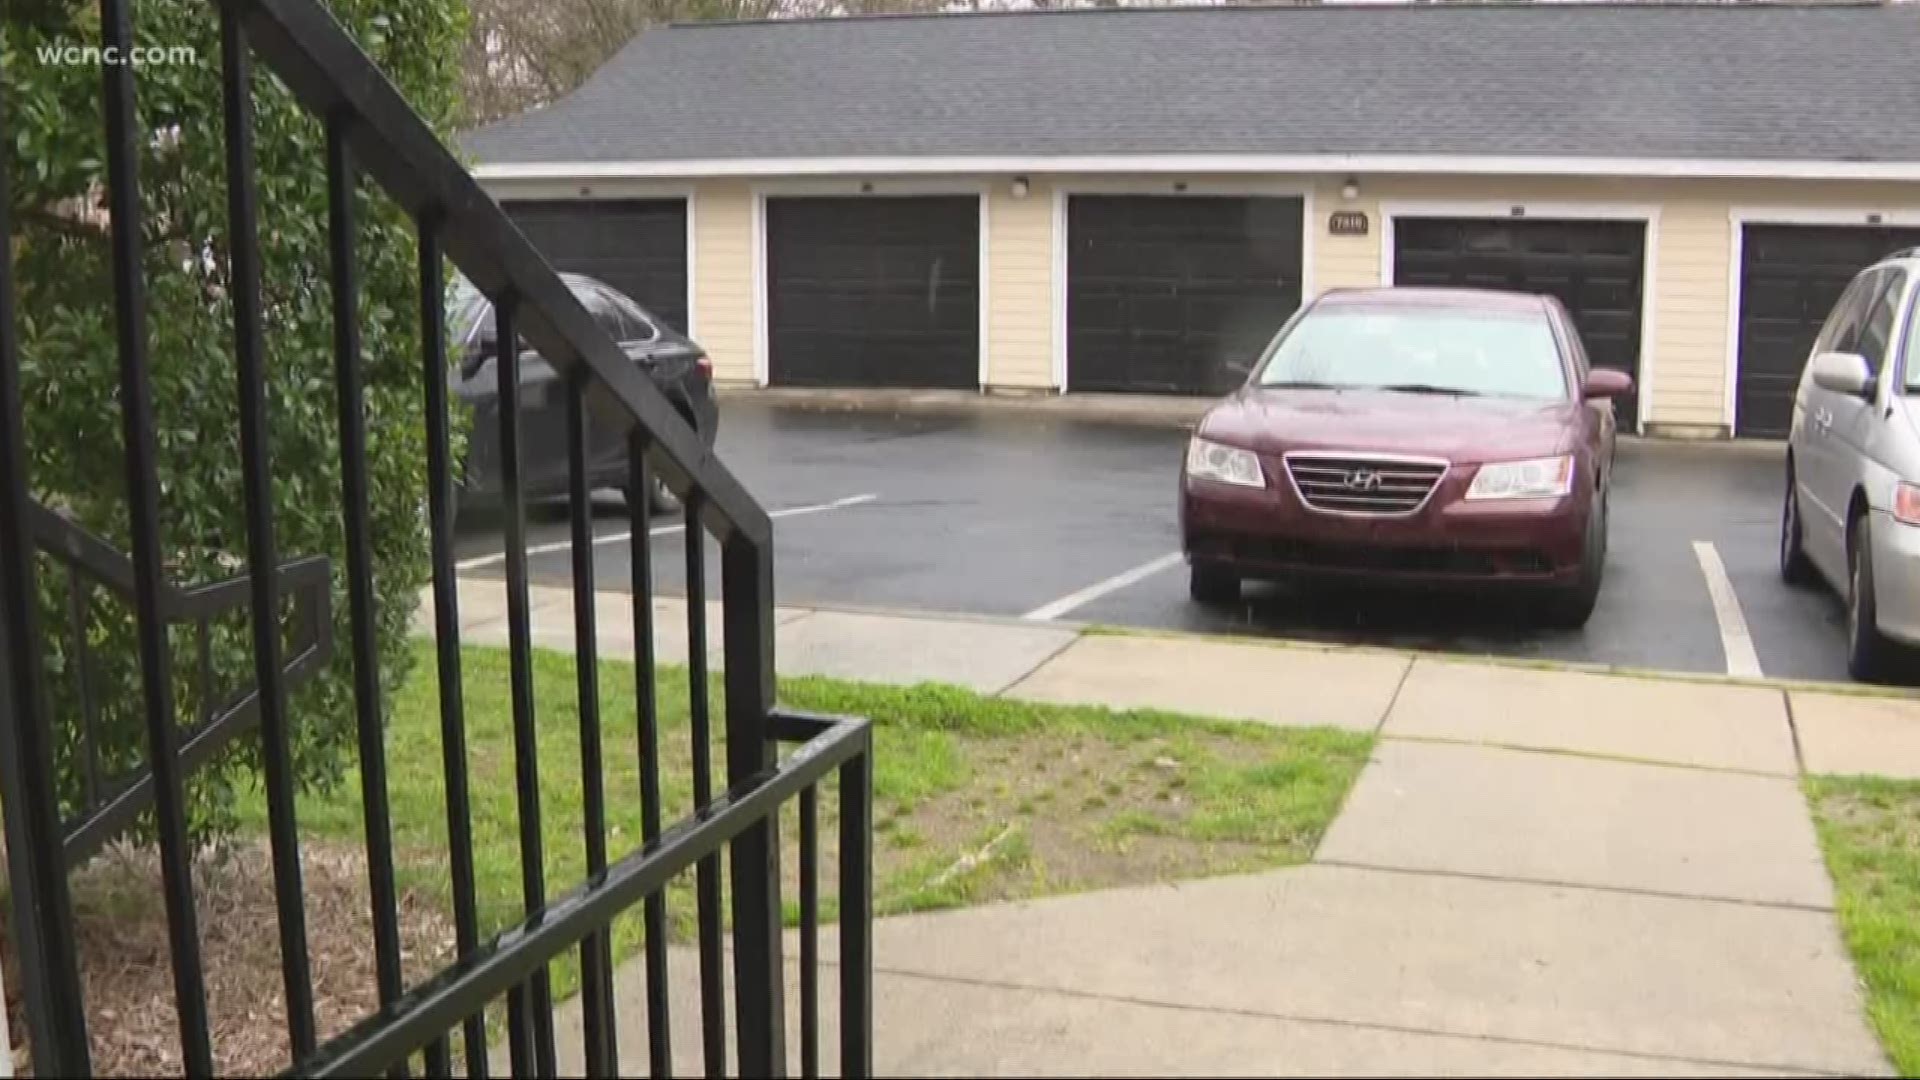 An elderly veteran was carjacked within months of another high profile robbery at the same apartment complex.